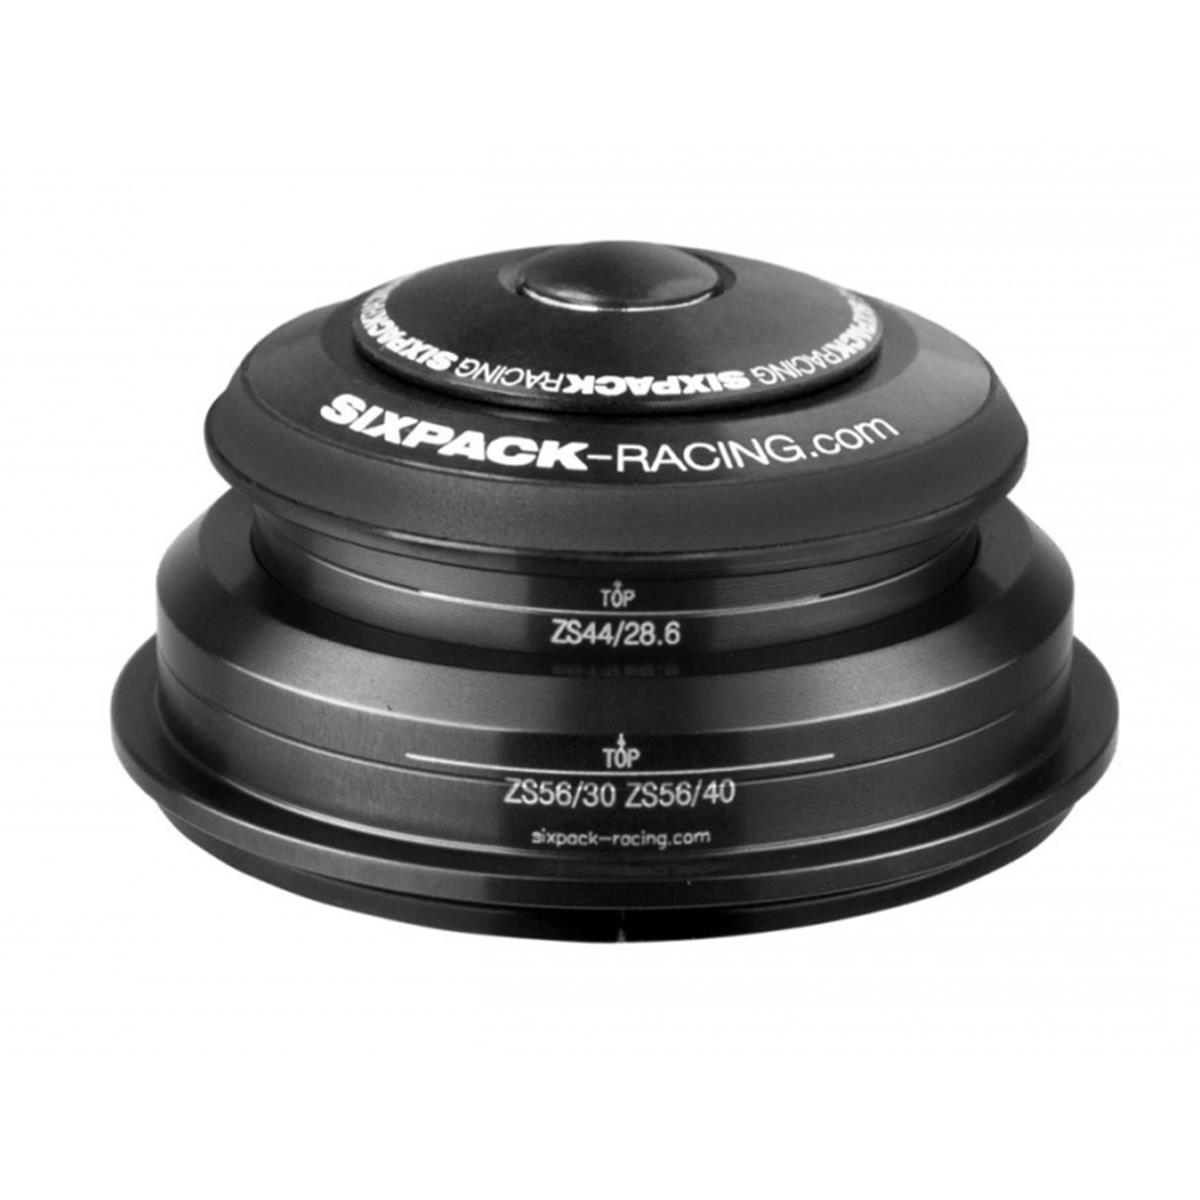 Sixpack Headset SXR 2in1 Black, ZS44/28.6 I ZS56/30 & ZS44/28.6 I ZS56/40